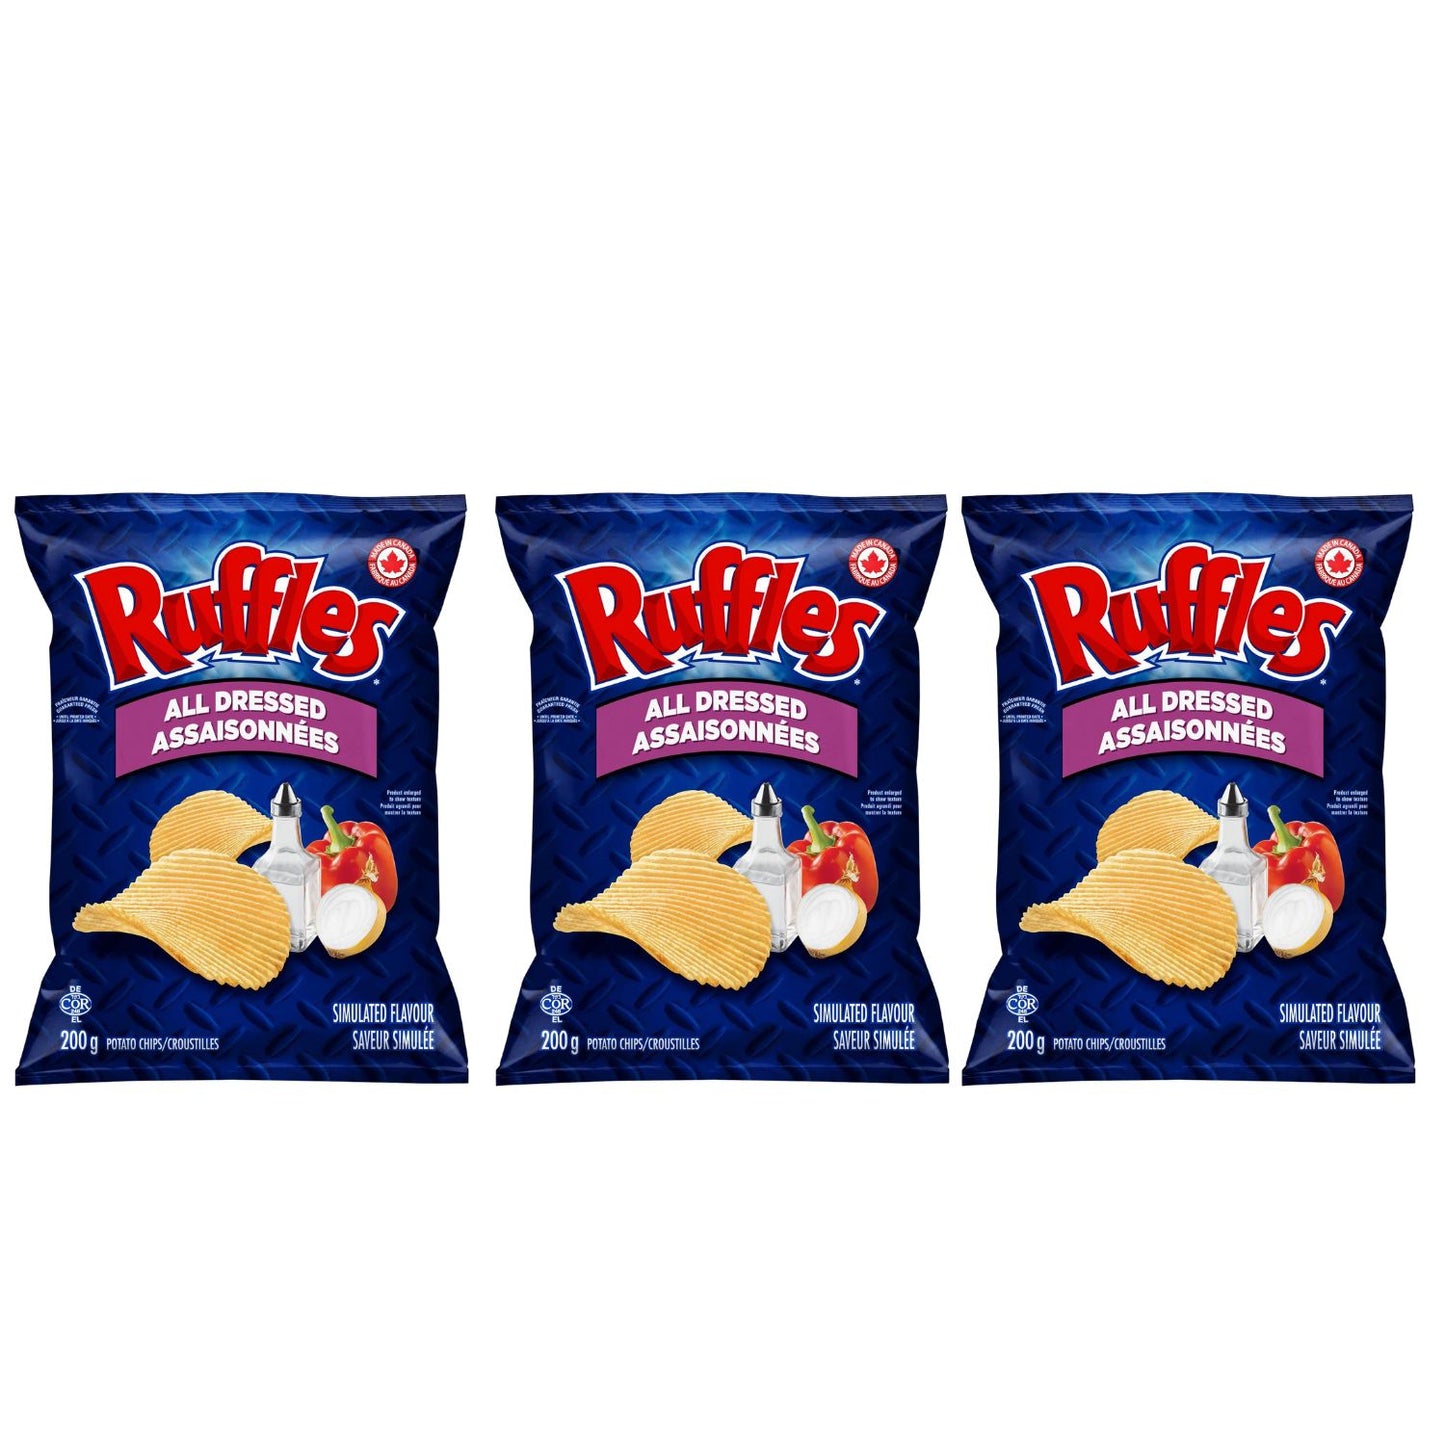 Ruffles All Dressed Potato Chips pack of 3